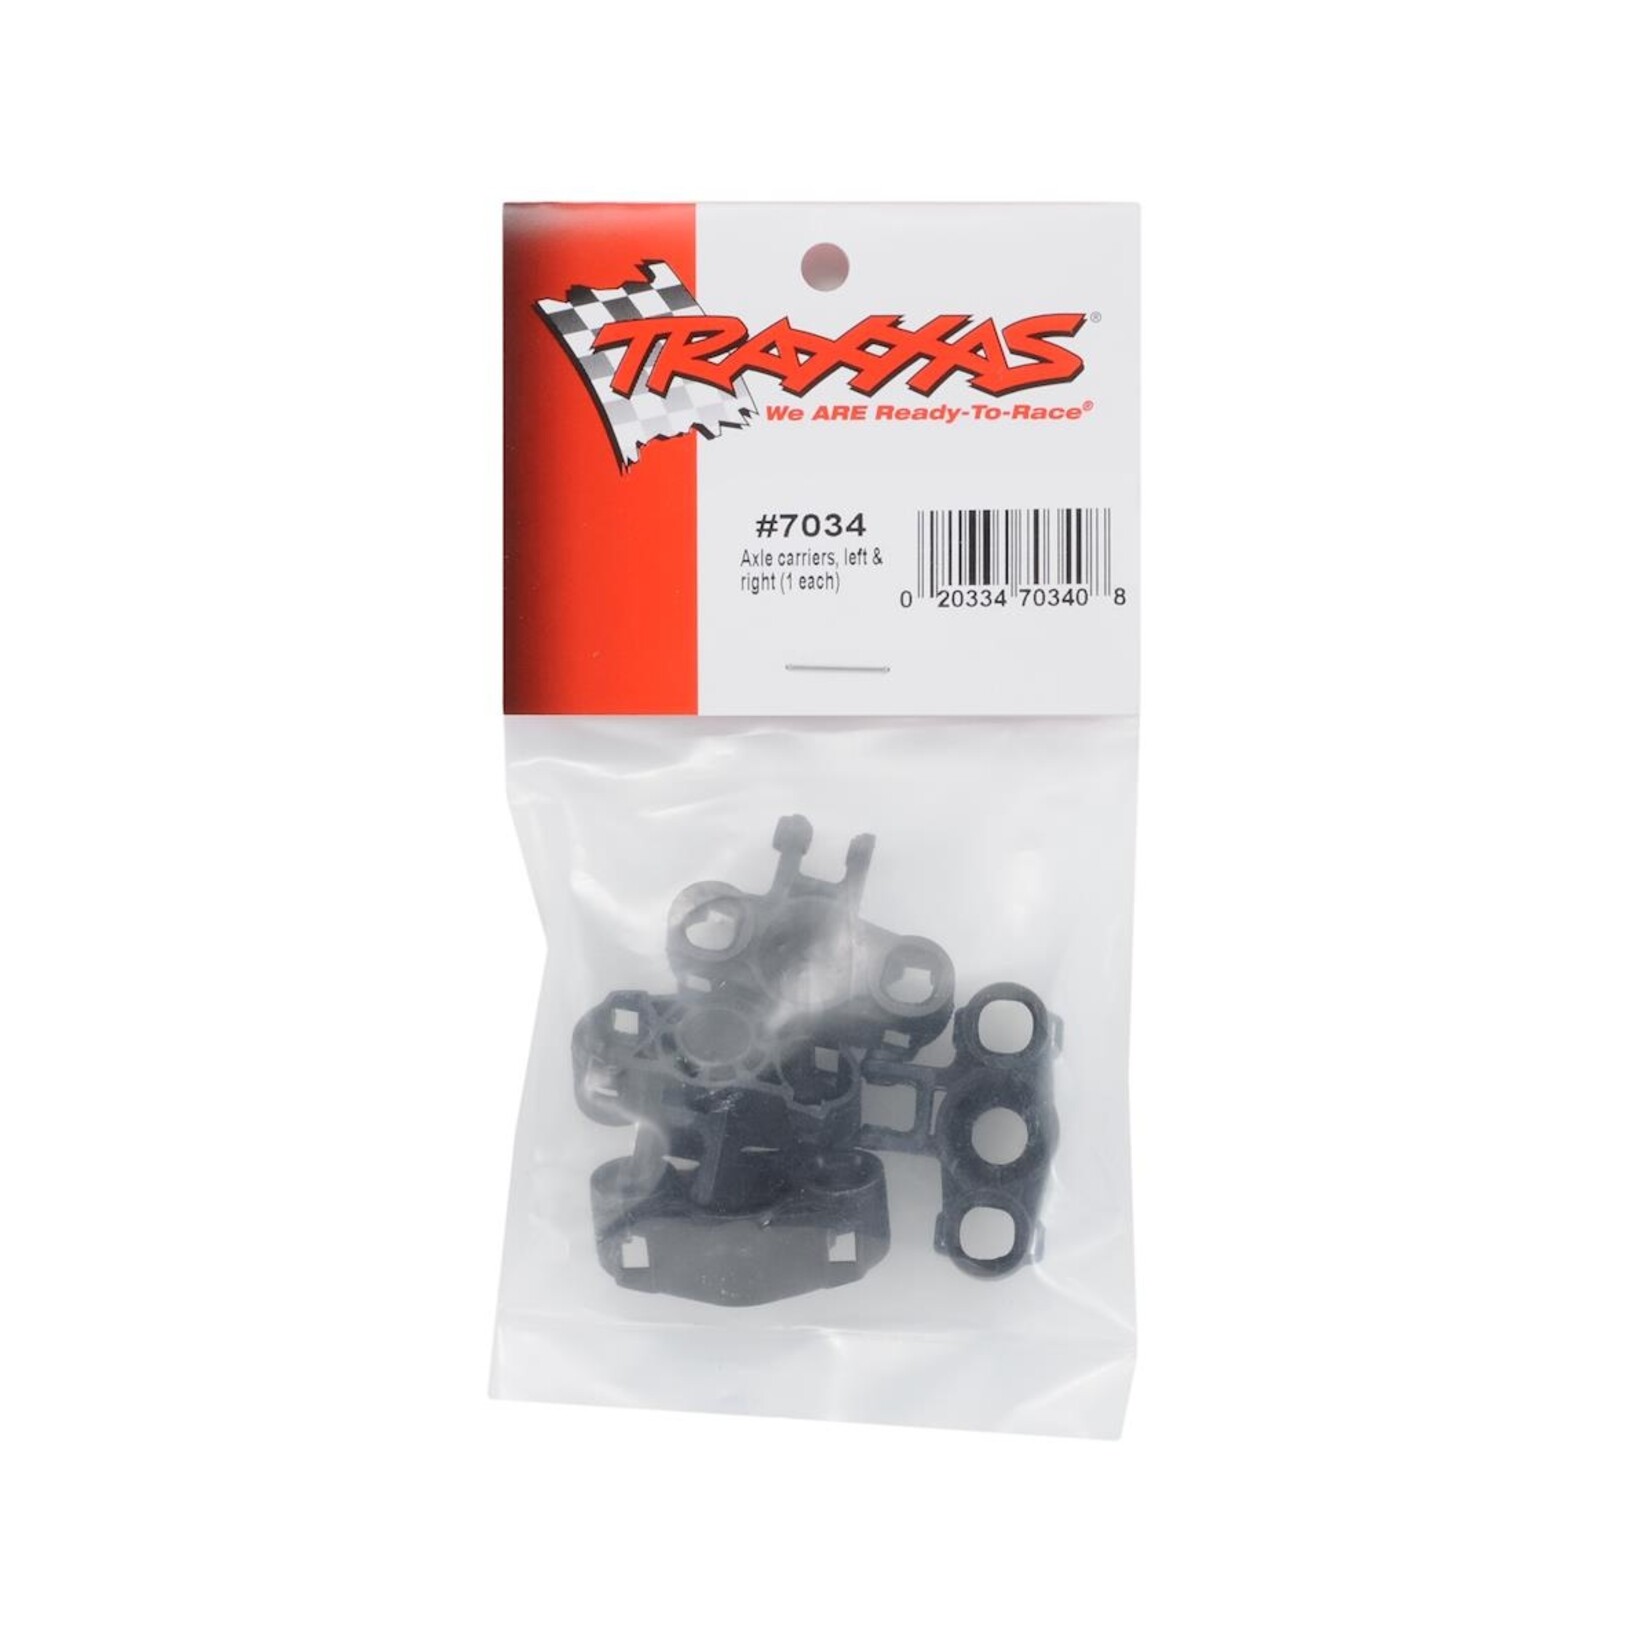 Traxxas Traxxas Left & Right Axle Carriers #7034